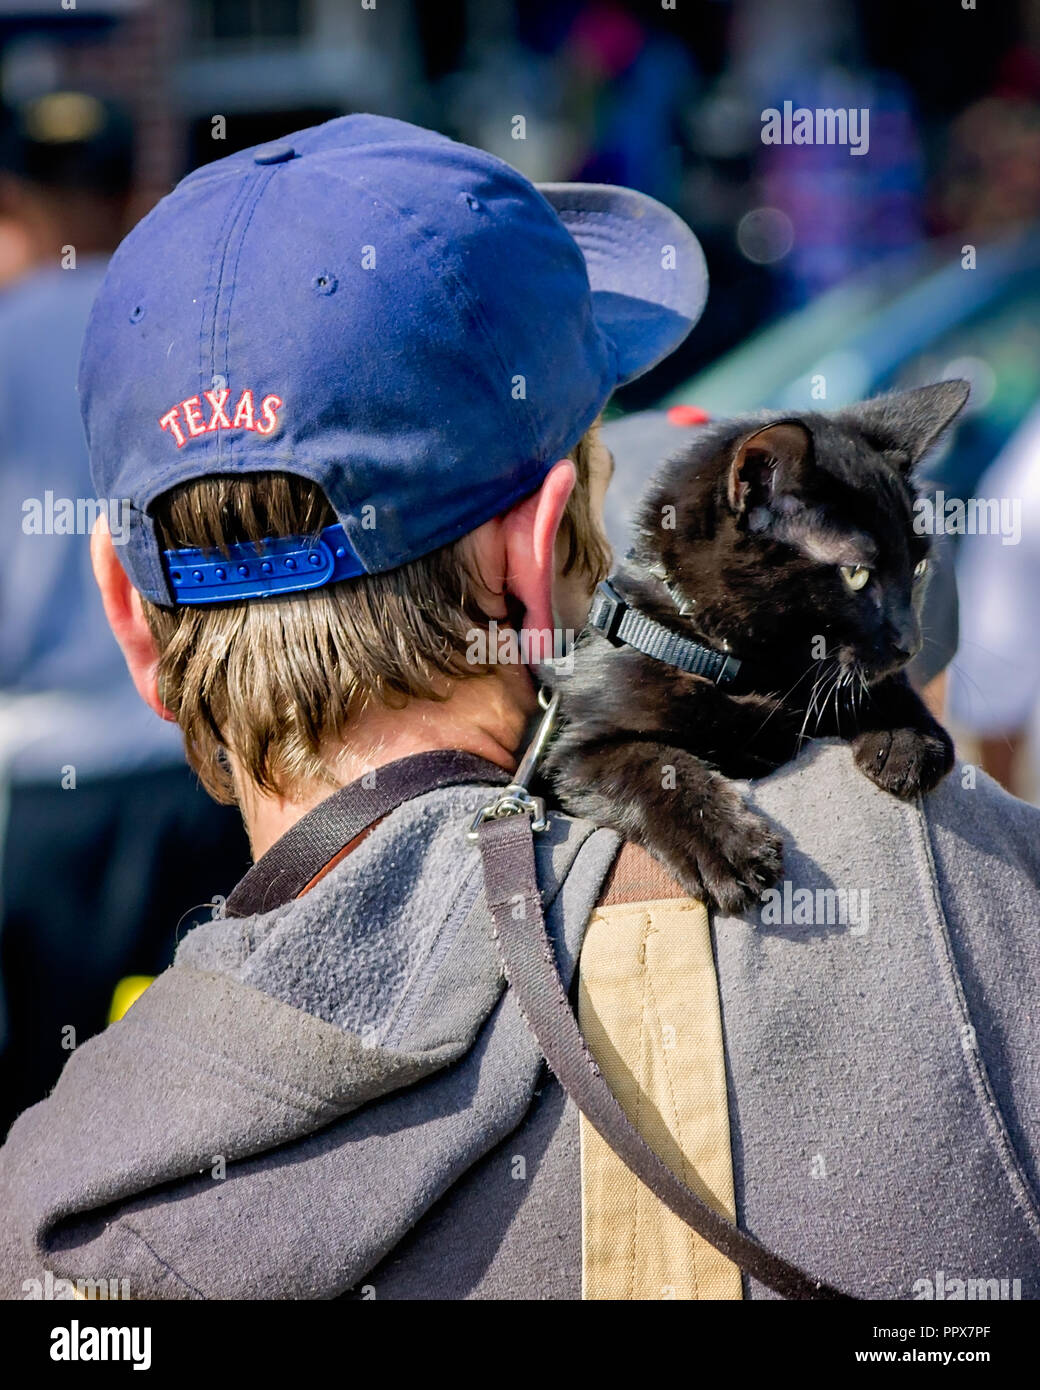 A man wearing a Texas cap and a hoodie carries a black cat wearing a harness on his shoulder, Nov. 15, 2015, in New Orleans, Louisiana. Stock Photo